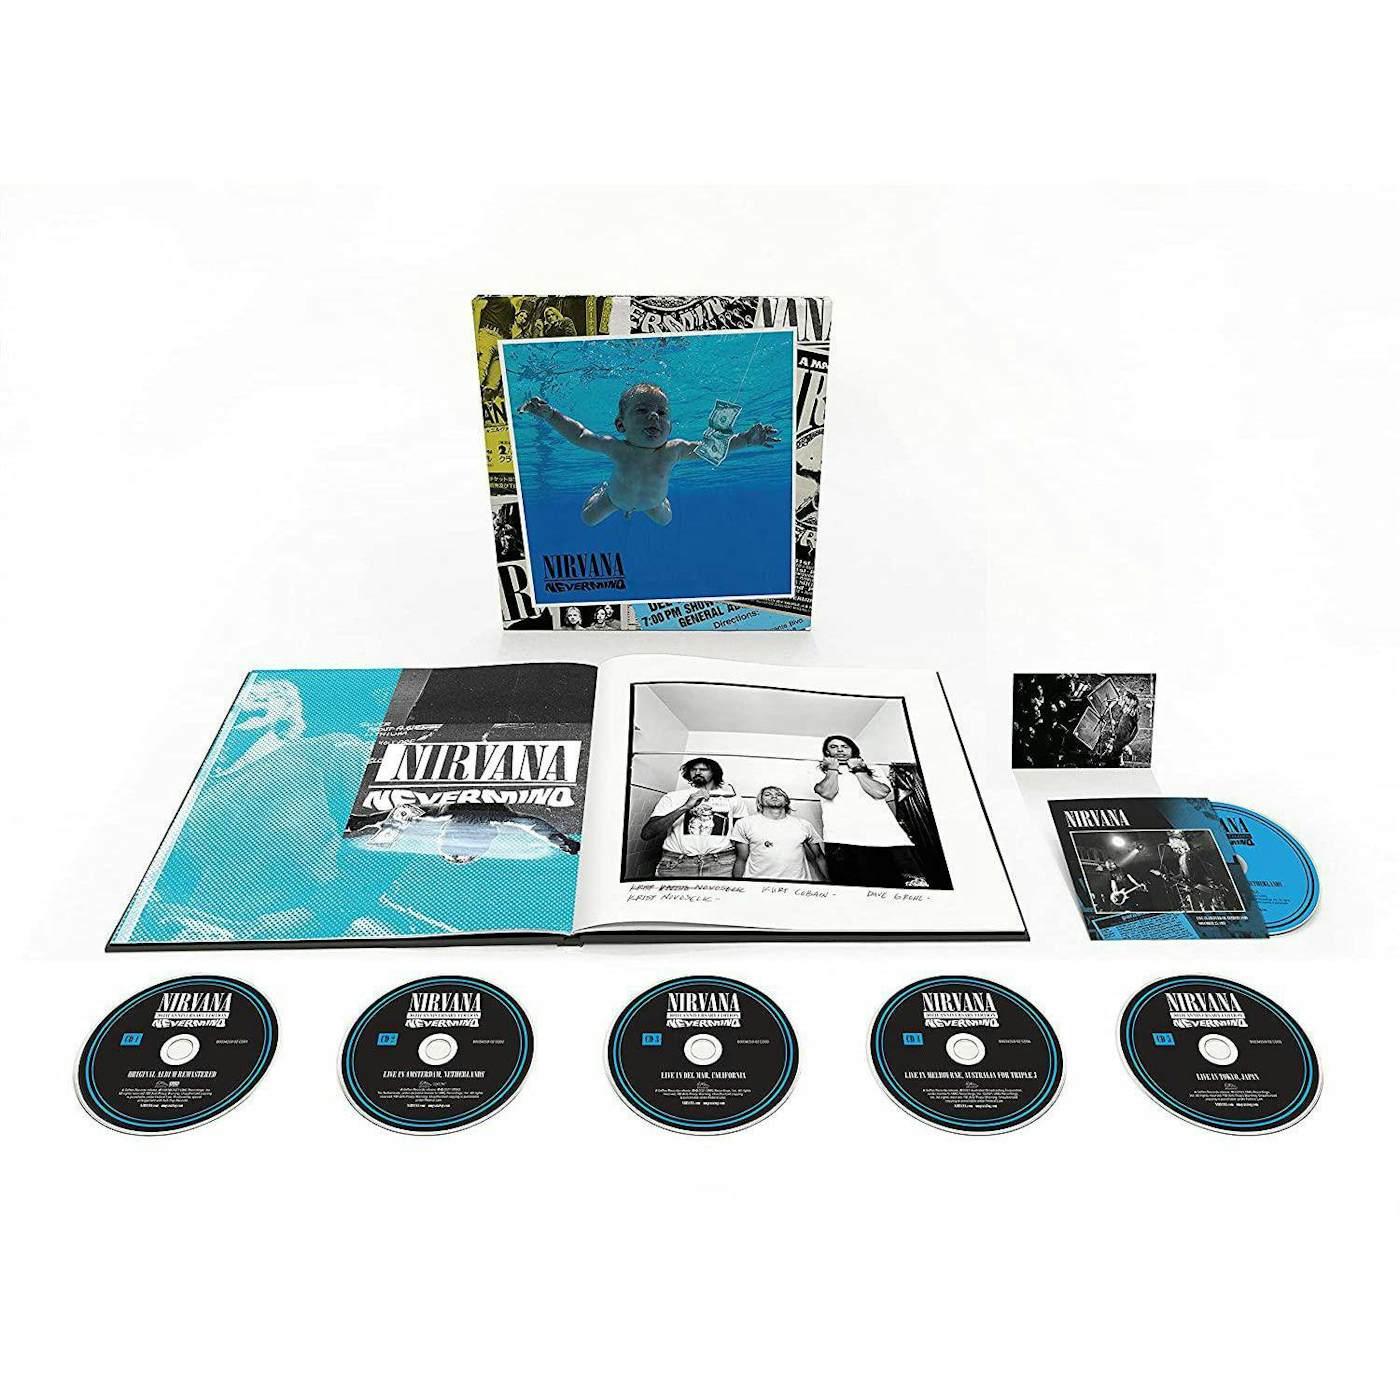 Nirvana Nevermind (30th Anniversary) (Super Deluxe 5 CD/Blu-ray